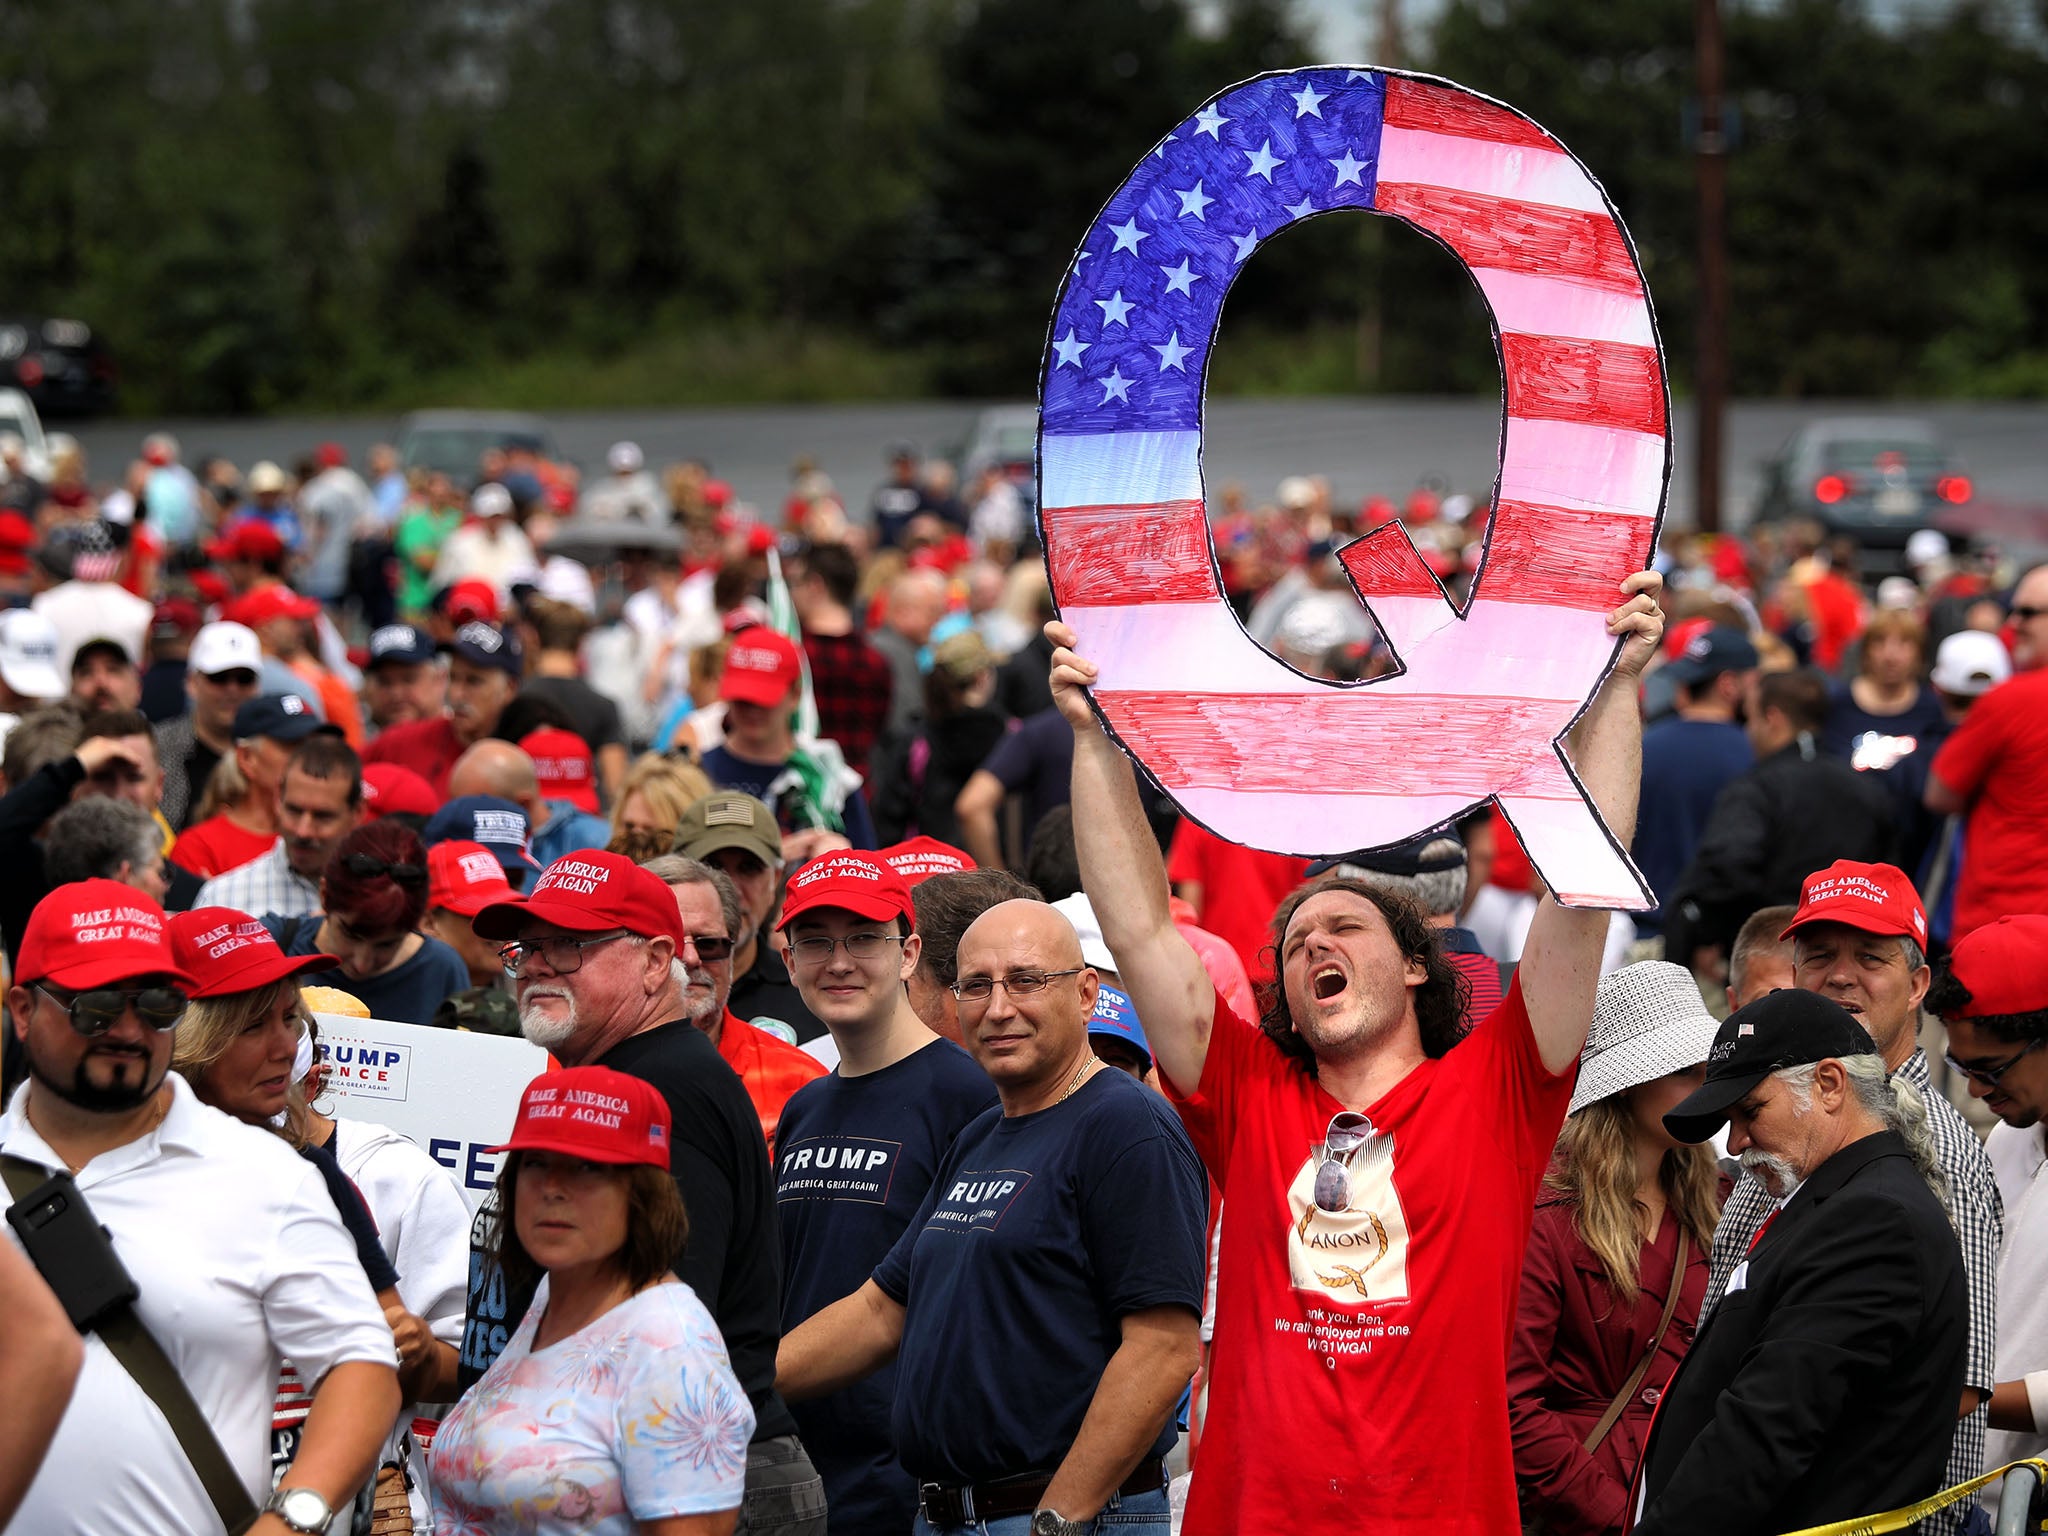 Believers in the QAnon conspiracy theory claim that democrats are devil worshippers